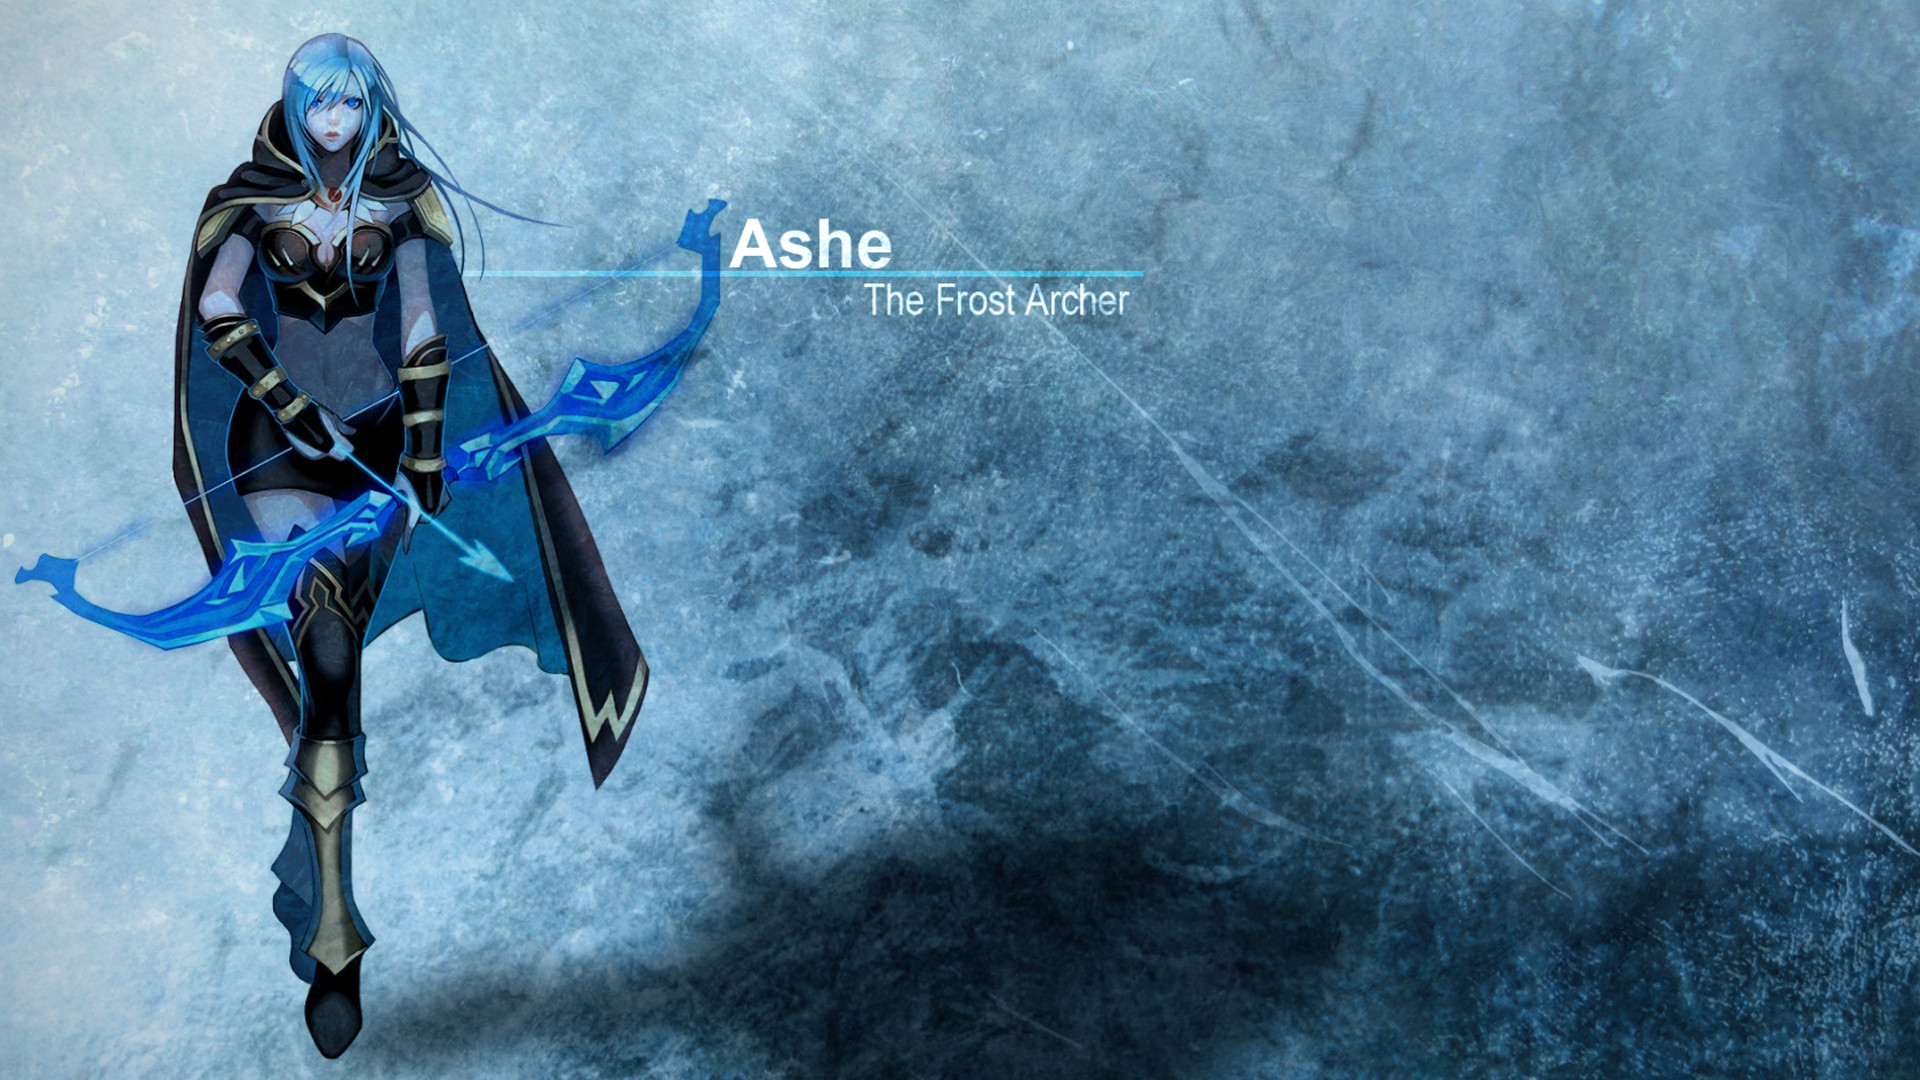 1920x1080 Ashe the Frost Archer Girl Picture Jmpv